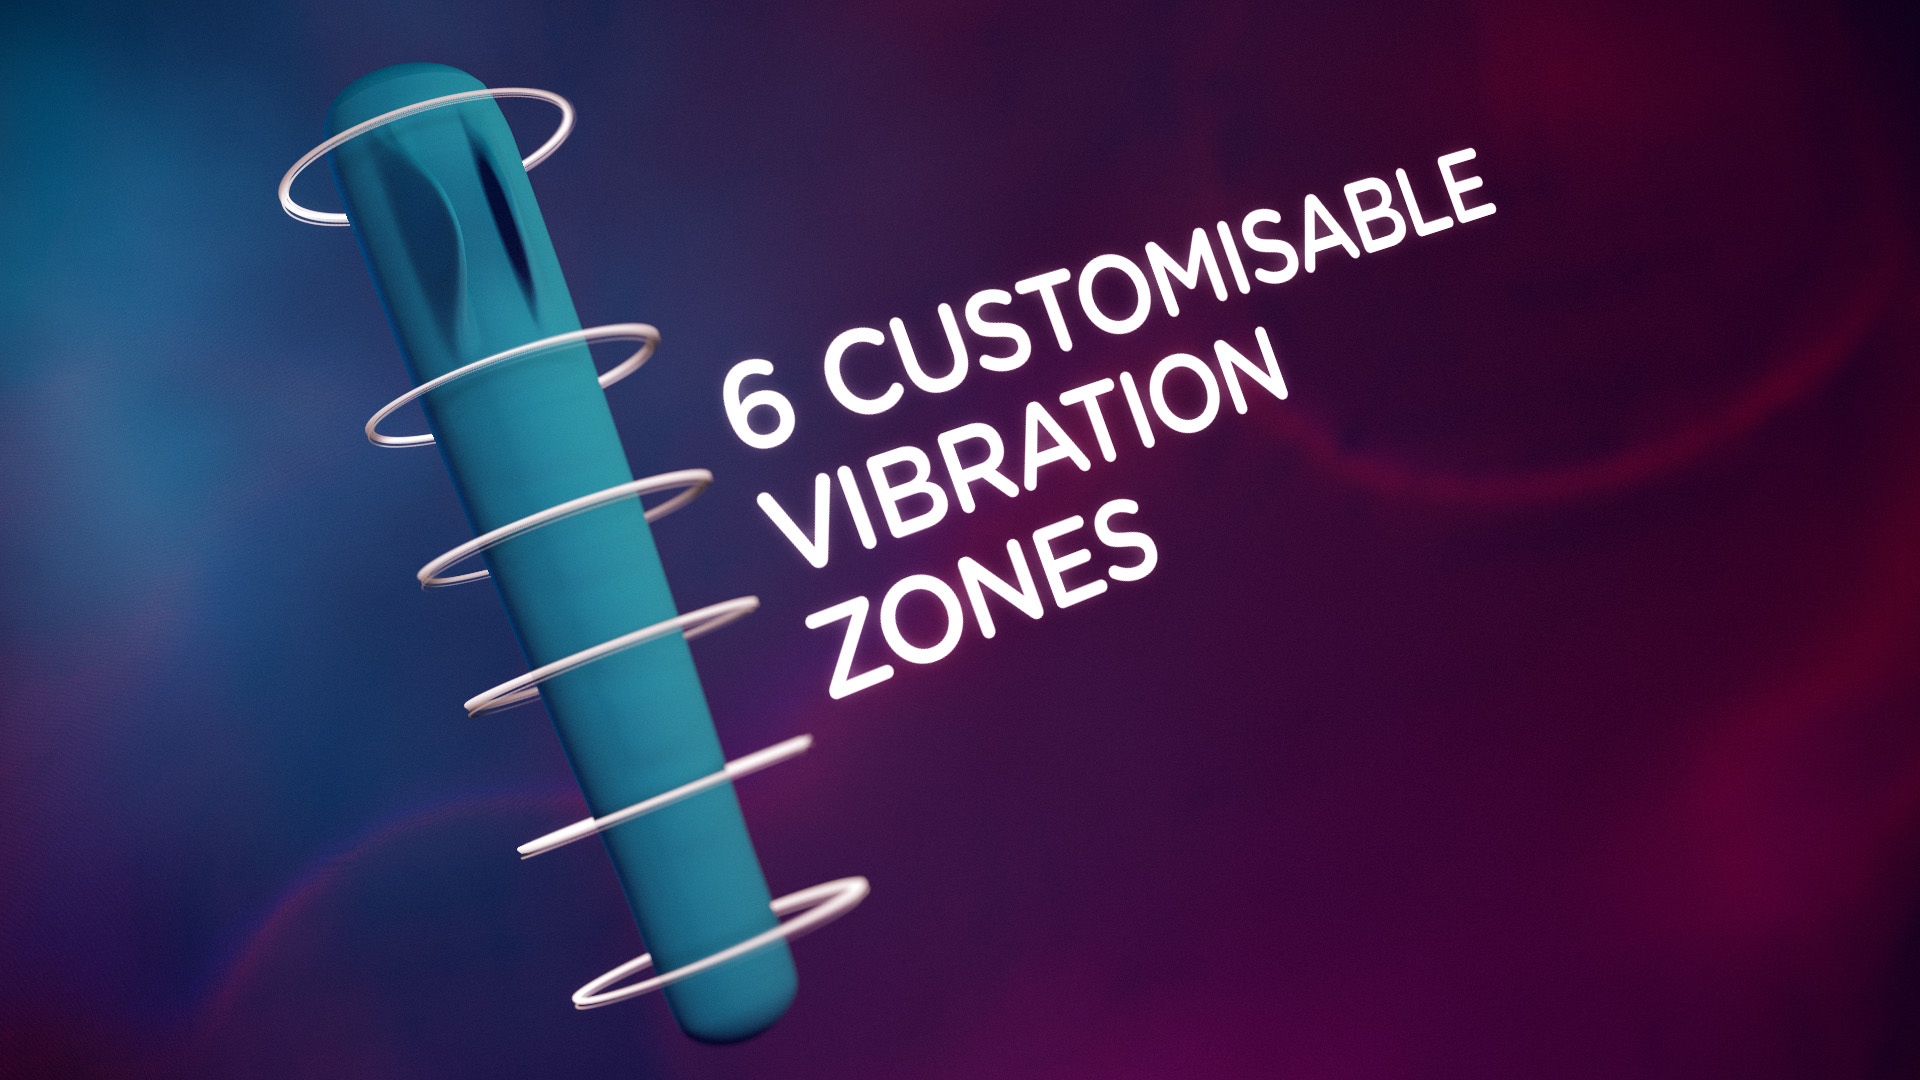 vibe zones annotation created in After Effects